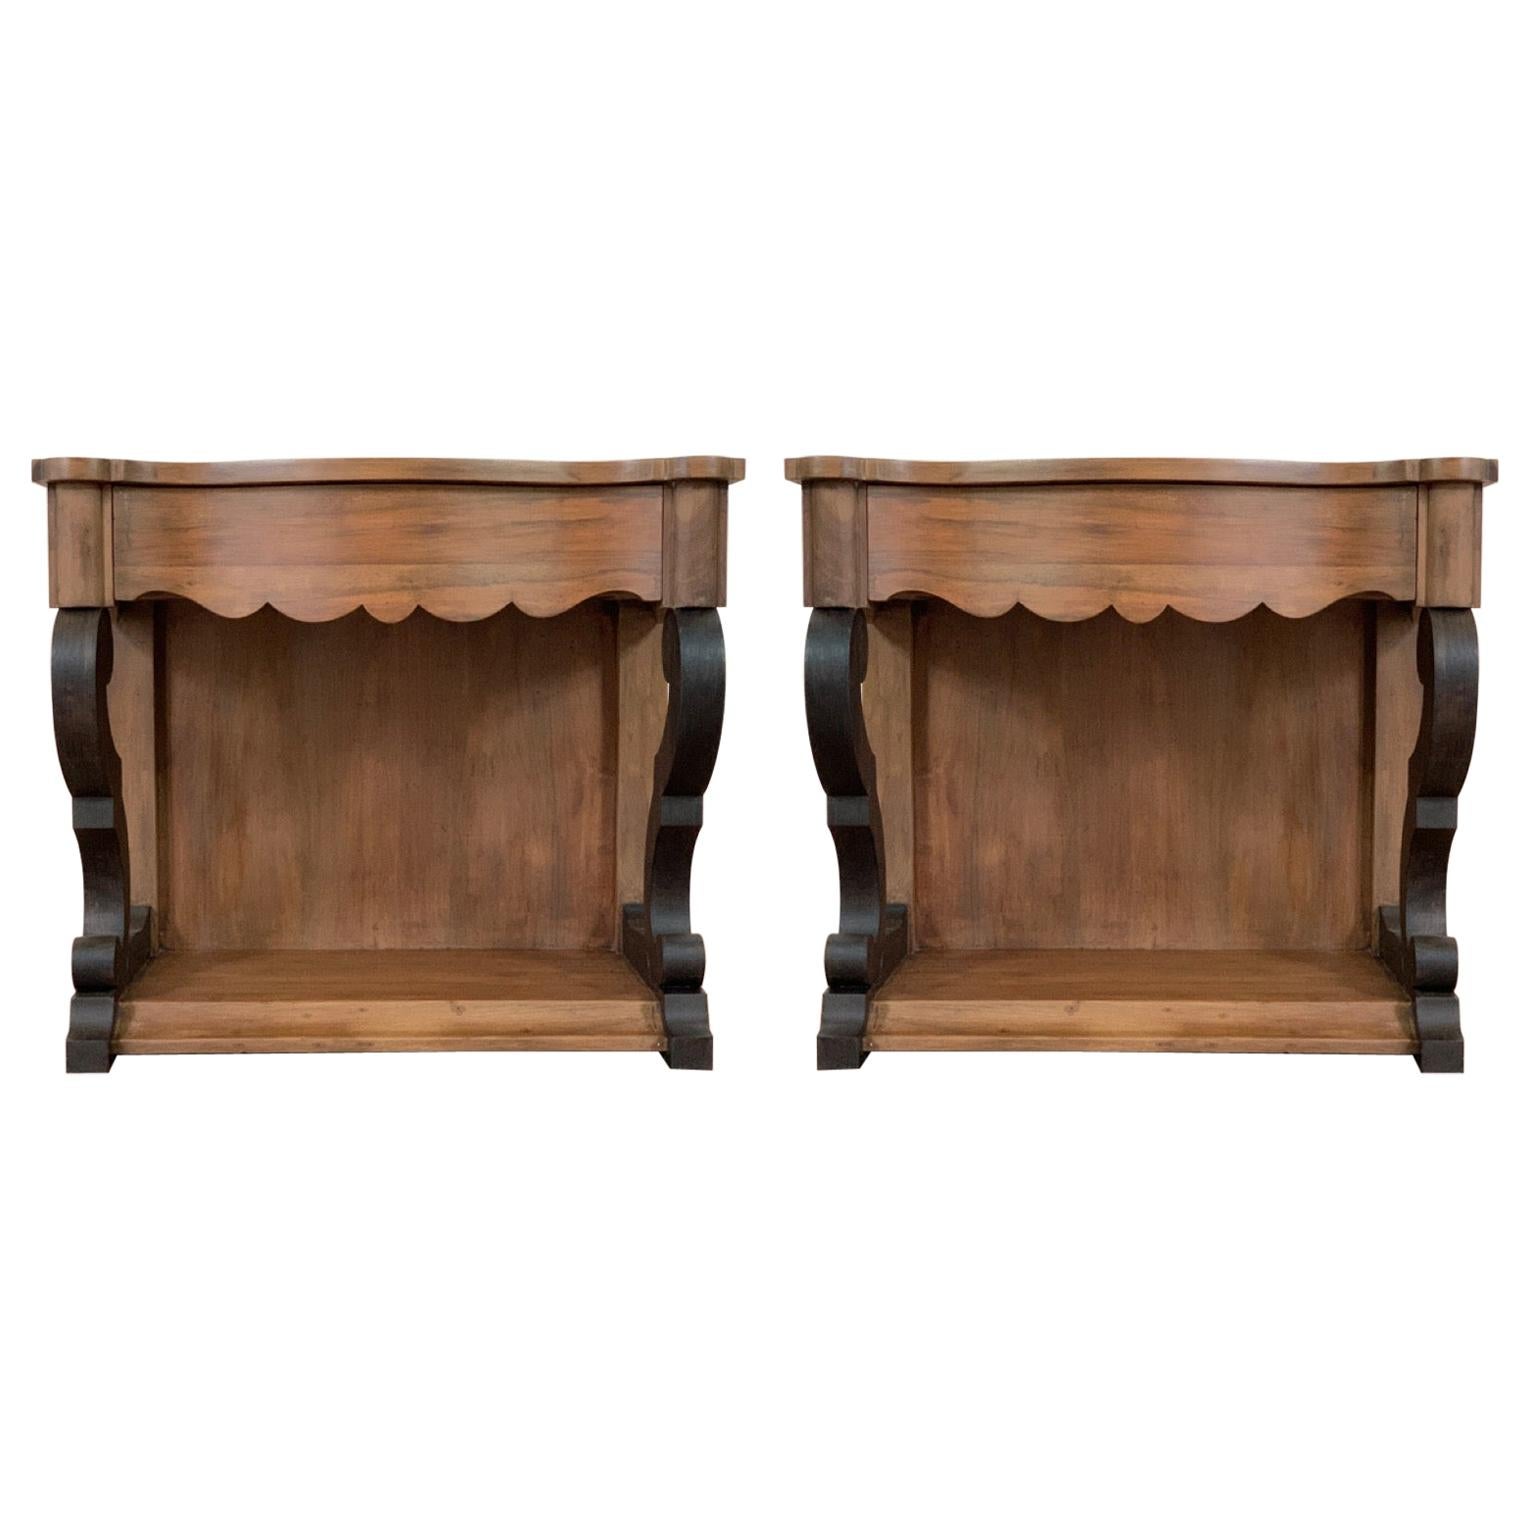 19th Century Low Pair of Console Tables or Nightstands in Mahogany